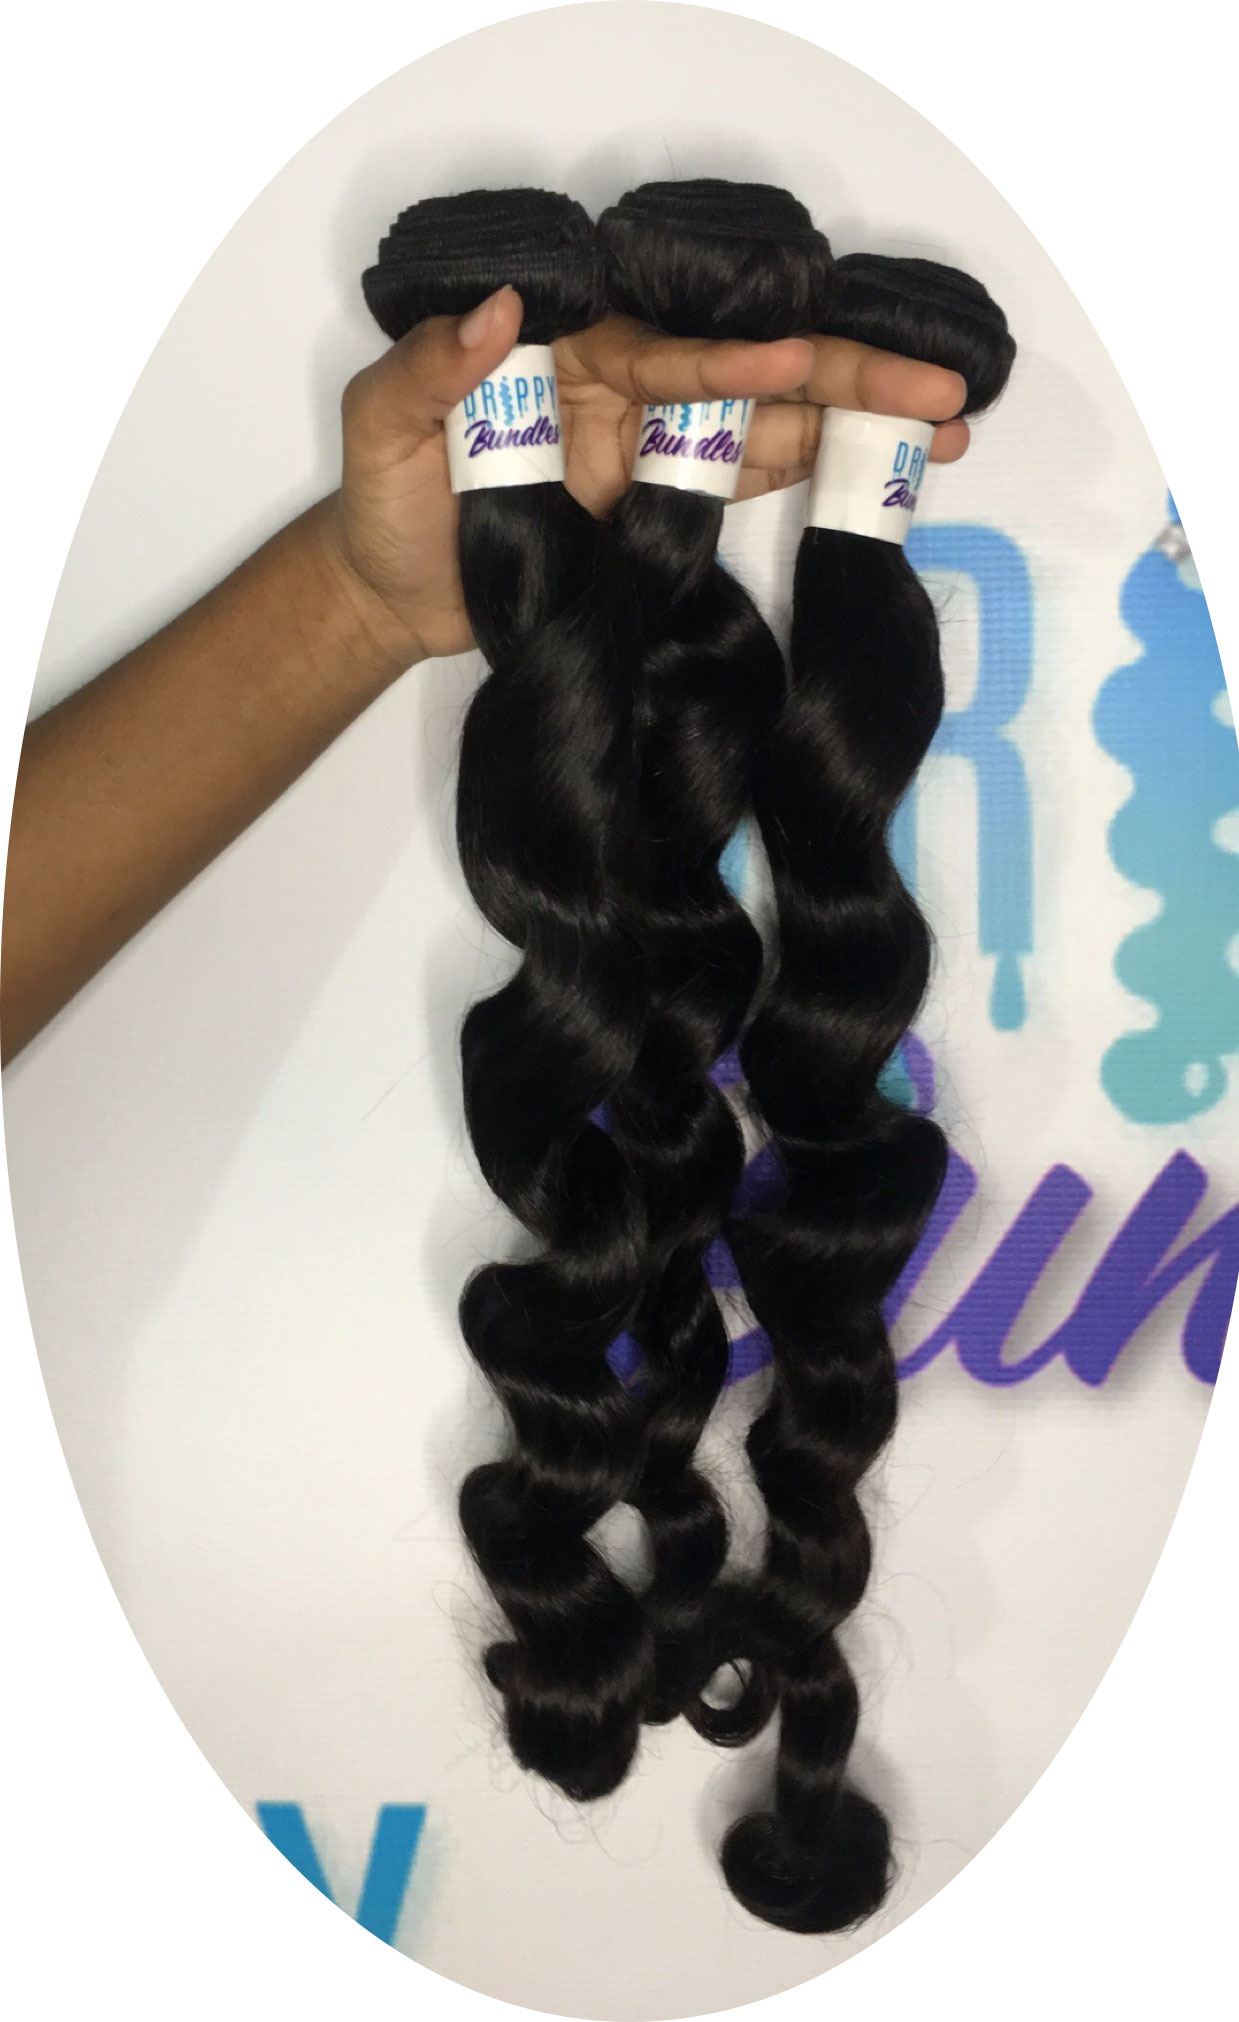 The Bundle Drip Women Hair Pieces and Hair Extension Products, Browse and Shop Our Online Hair Style Extensions.